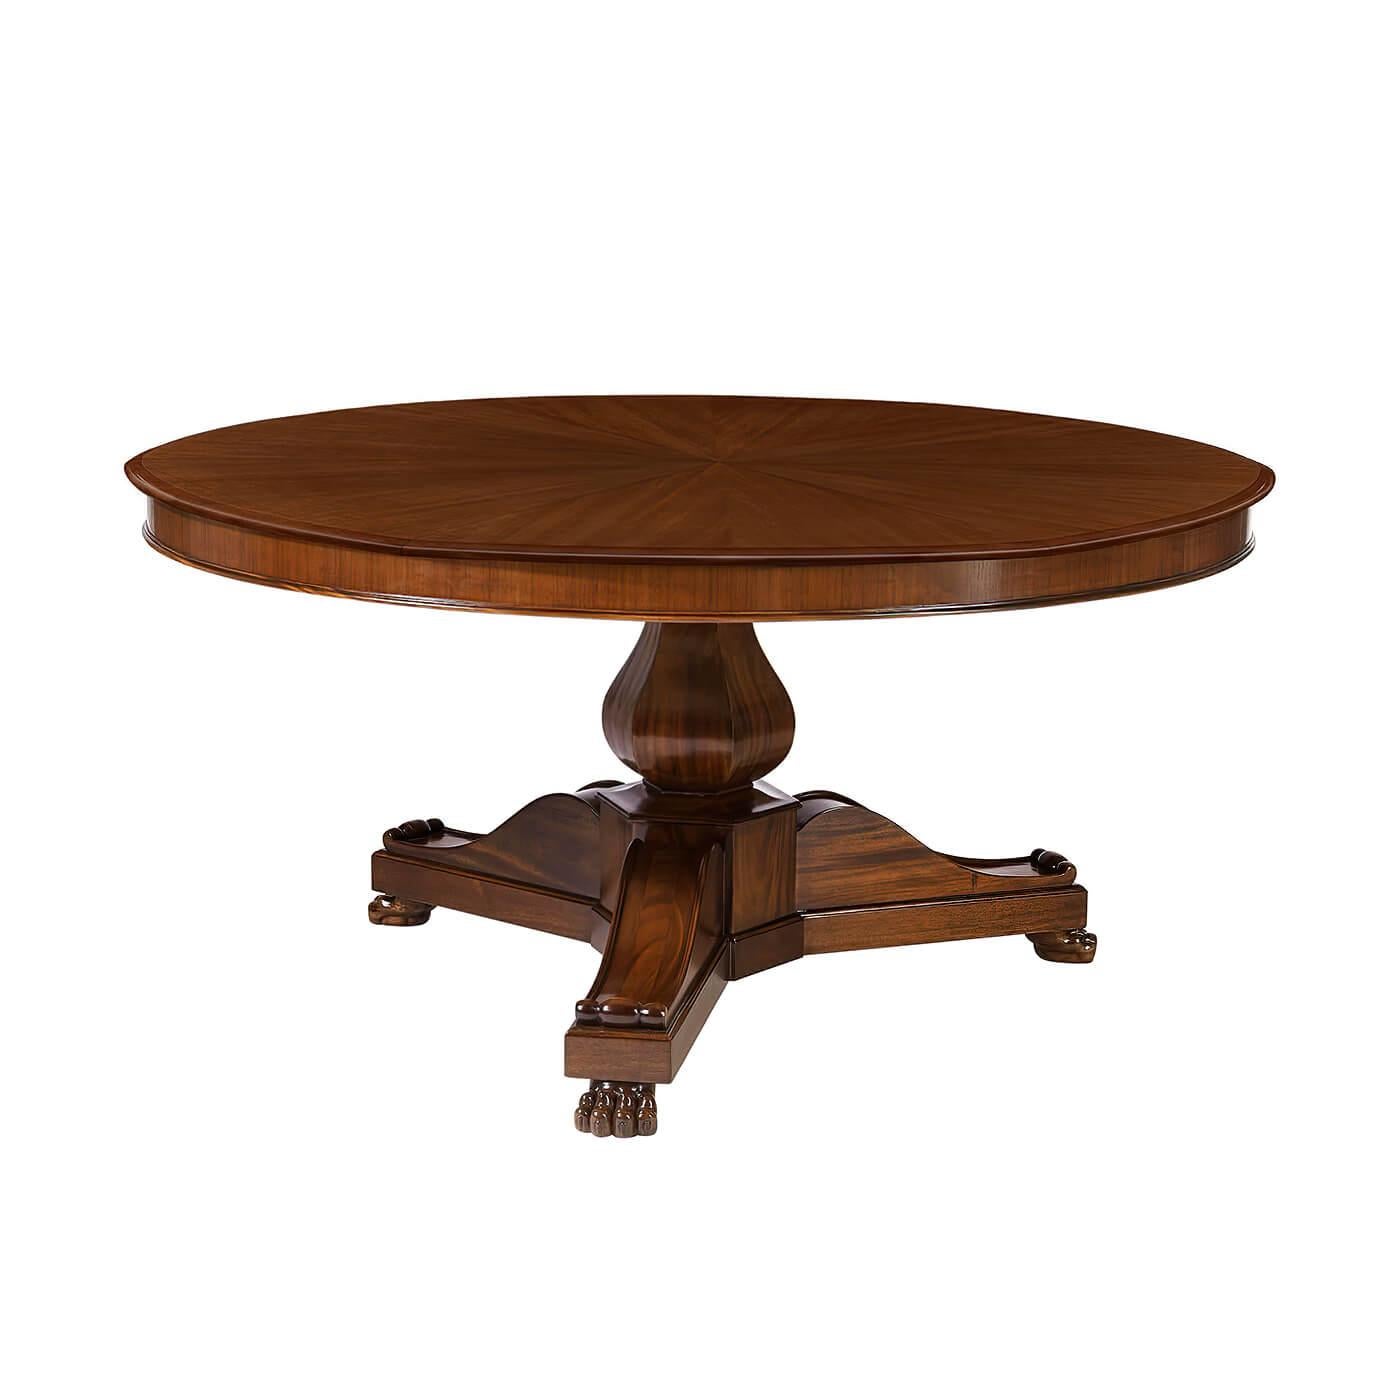 French Style extension dining table with carved pedestal, inset fold-out leaves, scrolled tri-base, and carved claw feet, with radiating veneer top. The table seats up to nine people when open.
Shown in Kings Finish
Self-Storing